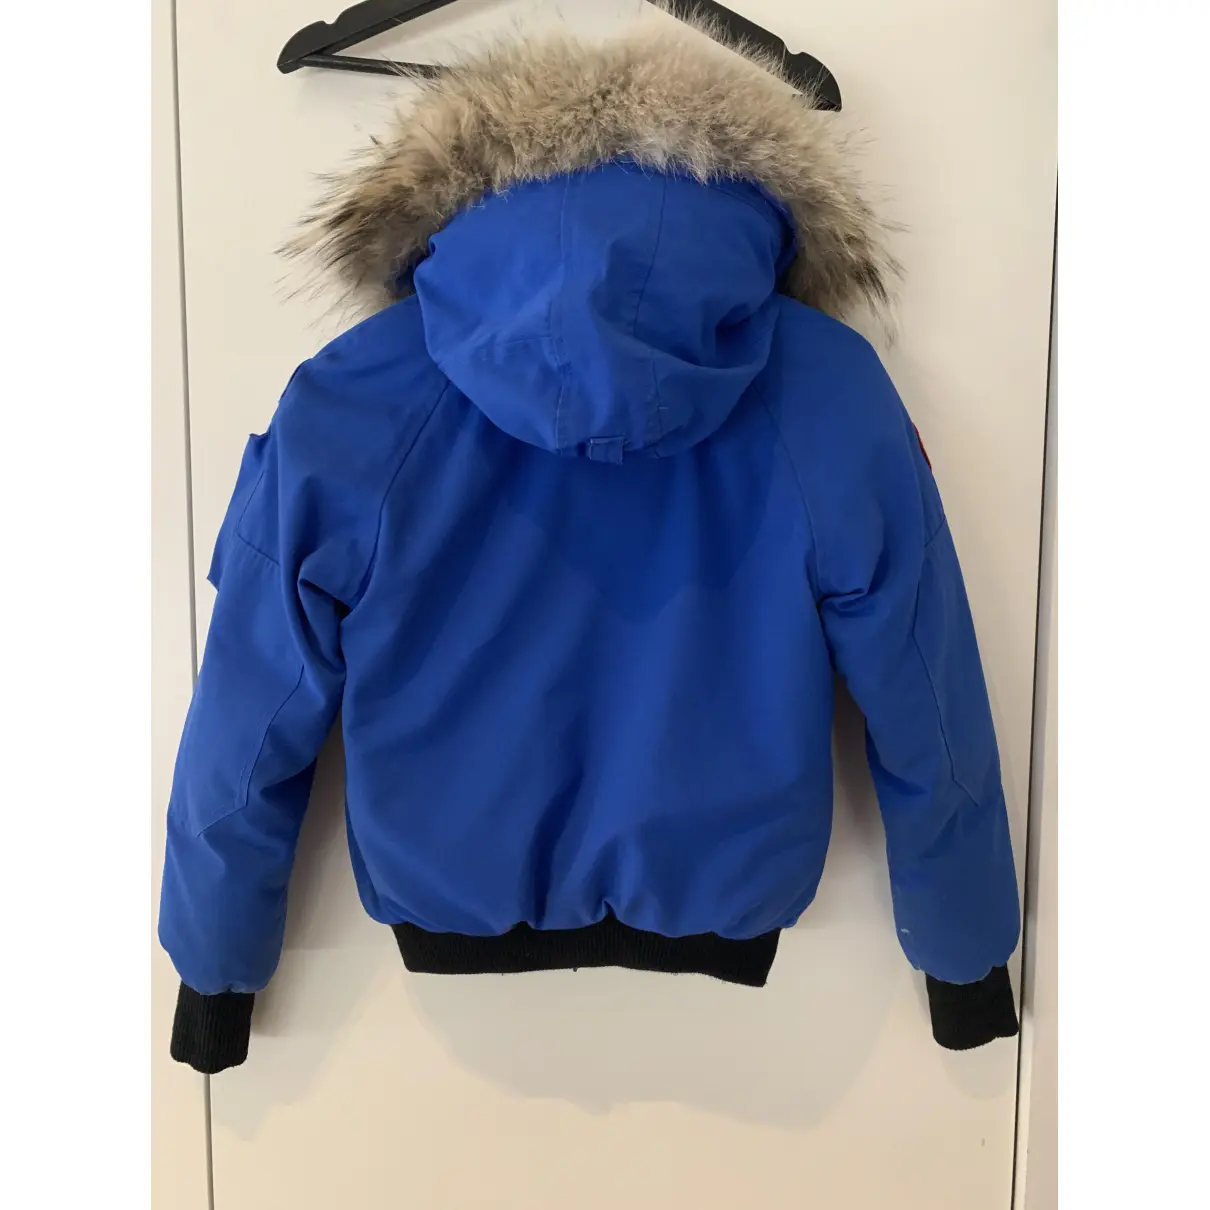 Buy Canada Goose Expedition puffer online